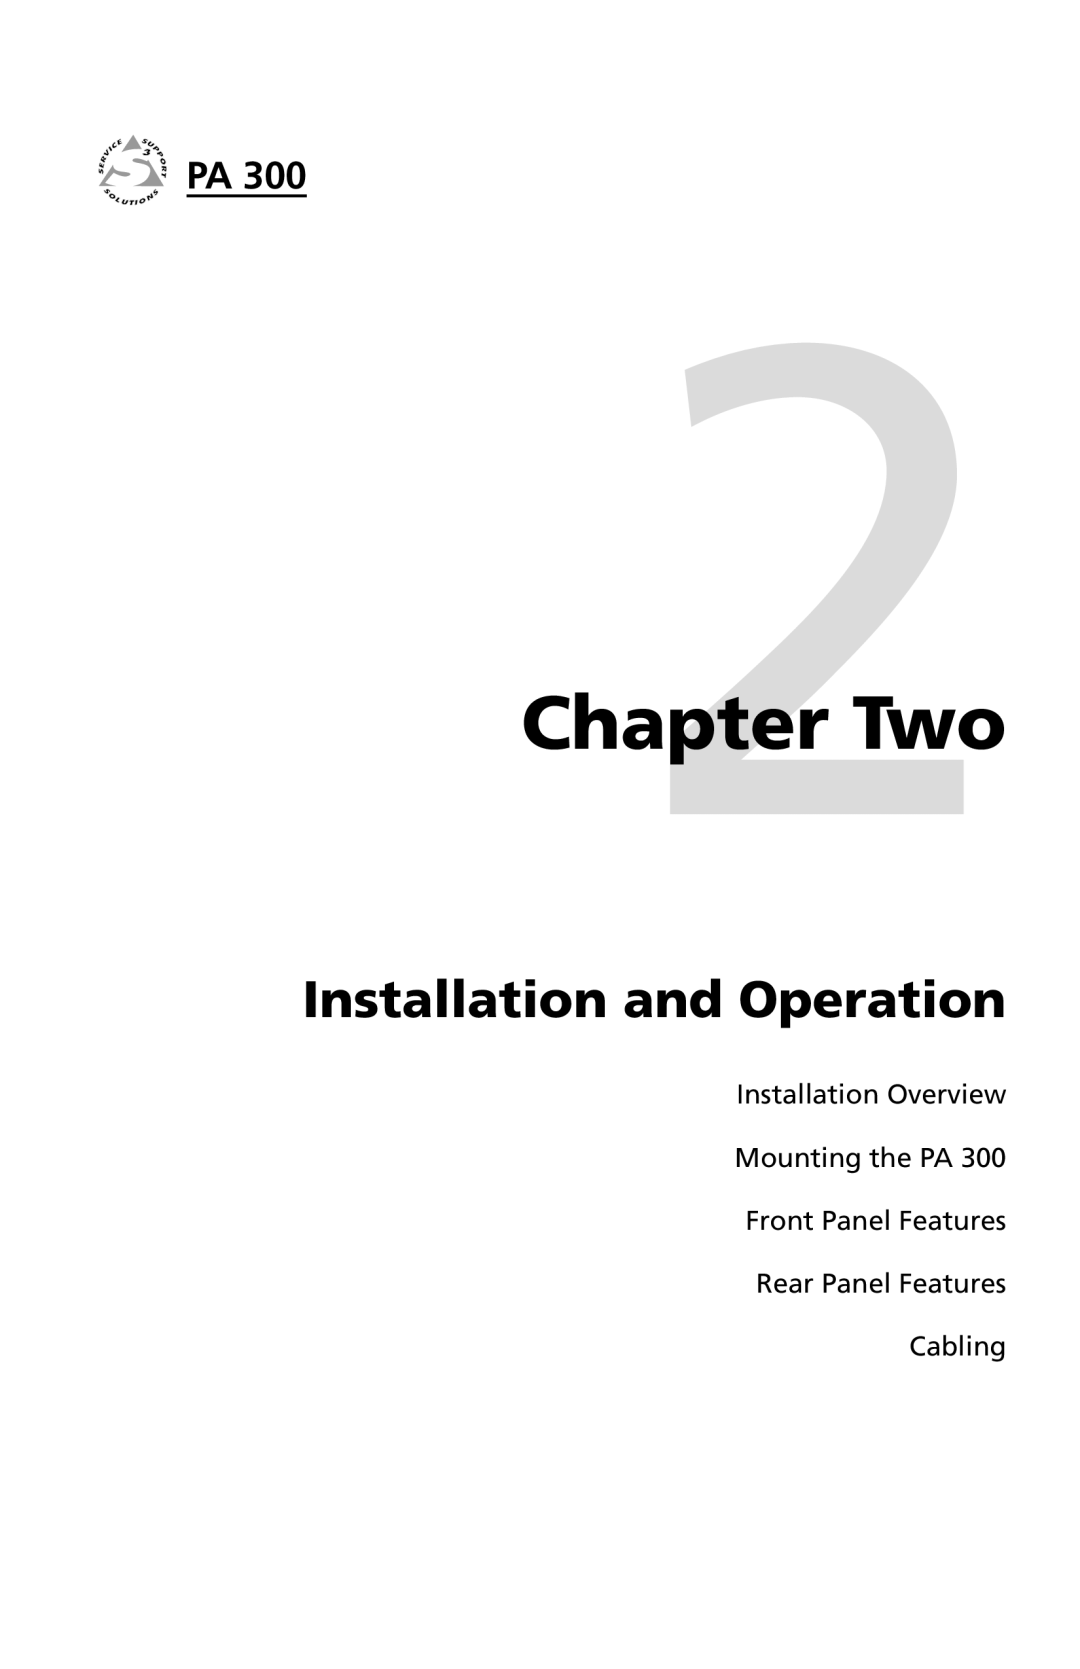 Extron electronic PA 300 user manual Two, Installation and Operation, Installation Overview Mounting the PA 